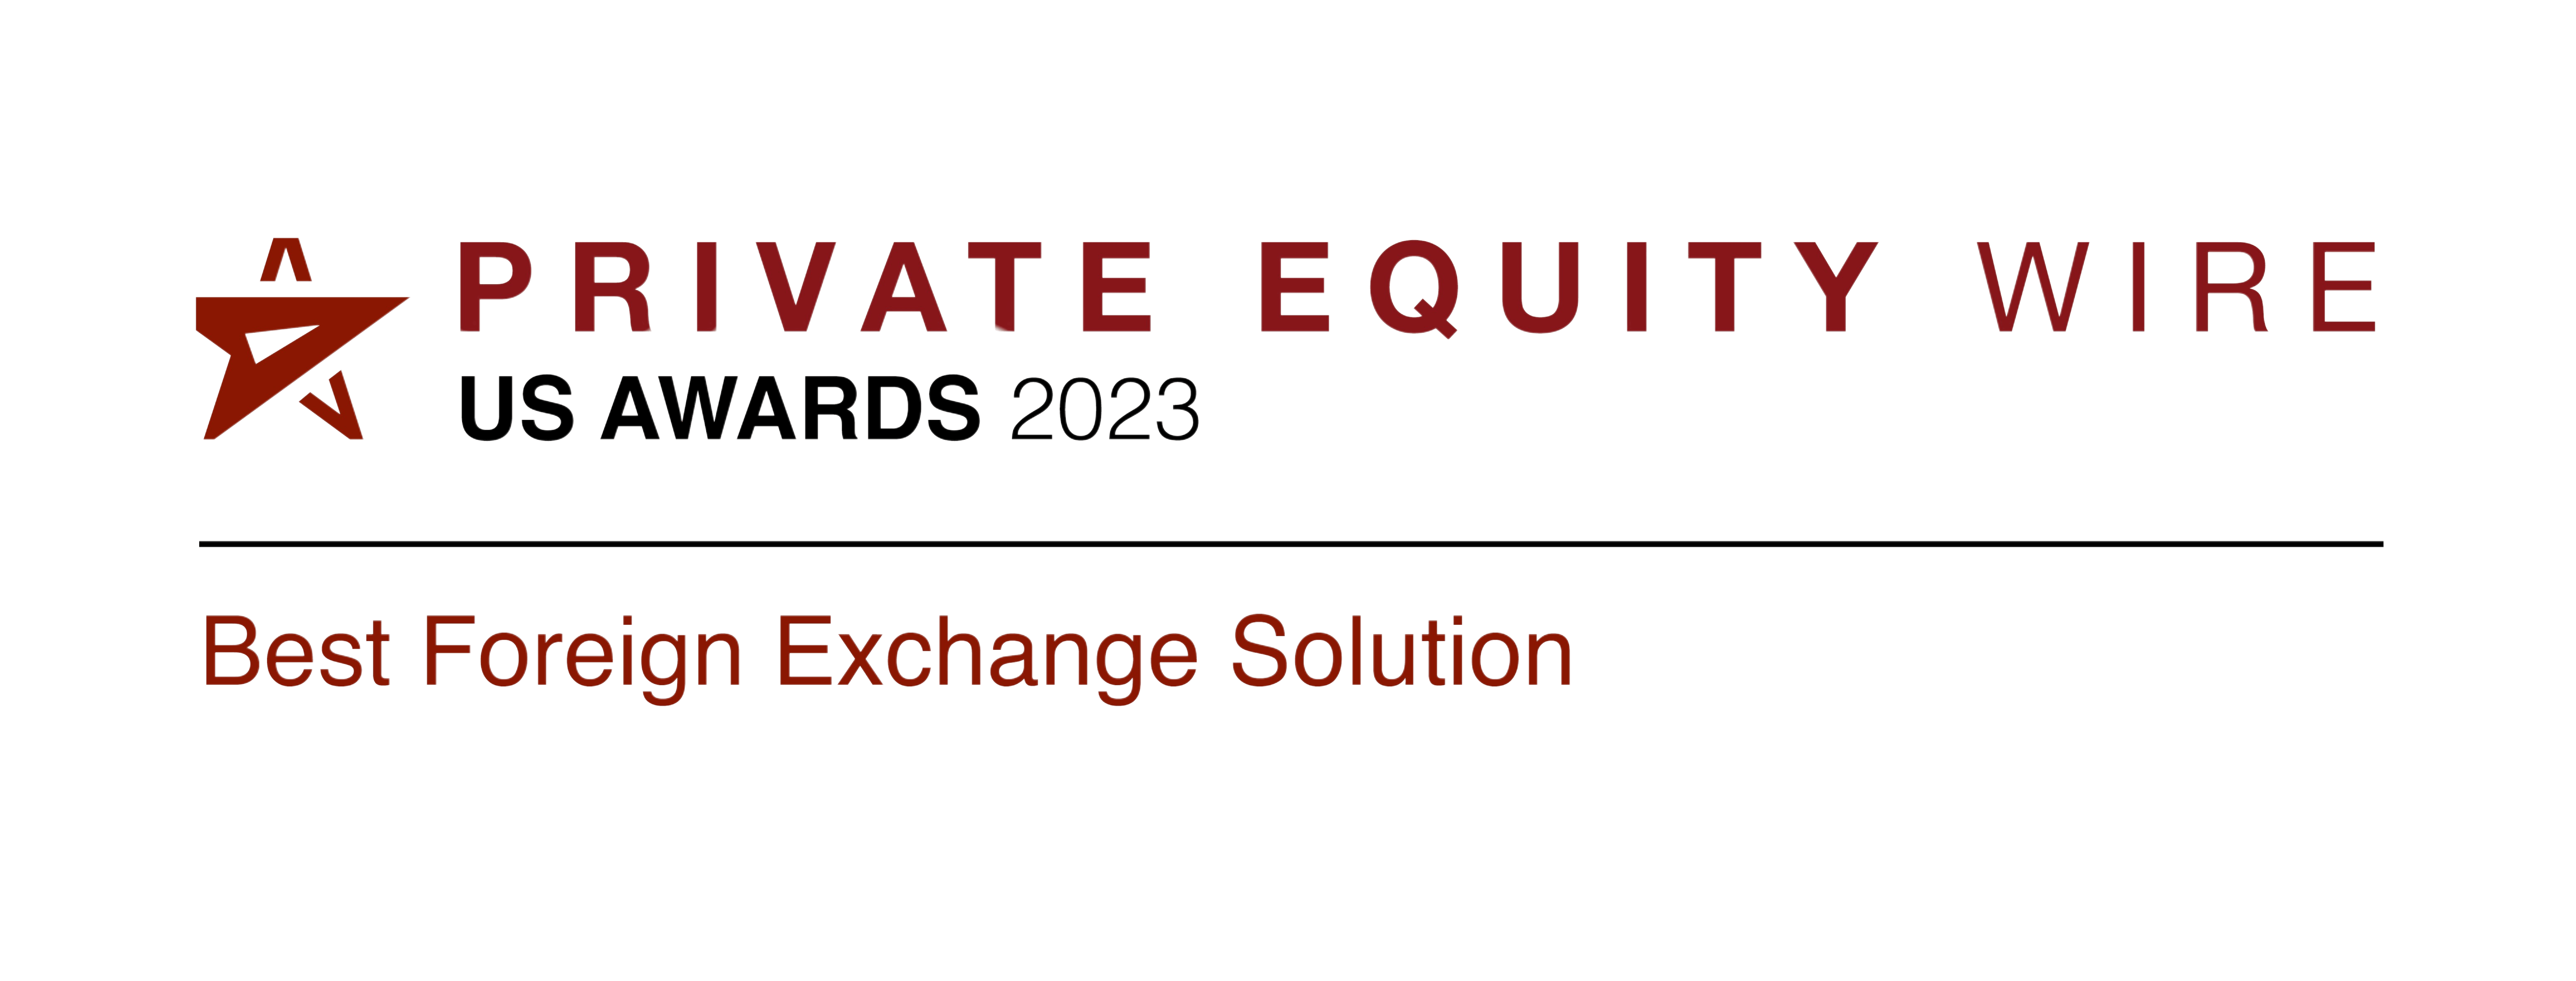 Private Equity Wire - US Awards 2023 - Best Foreign Exchange Solution